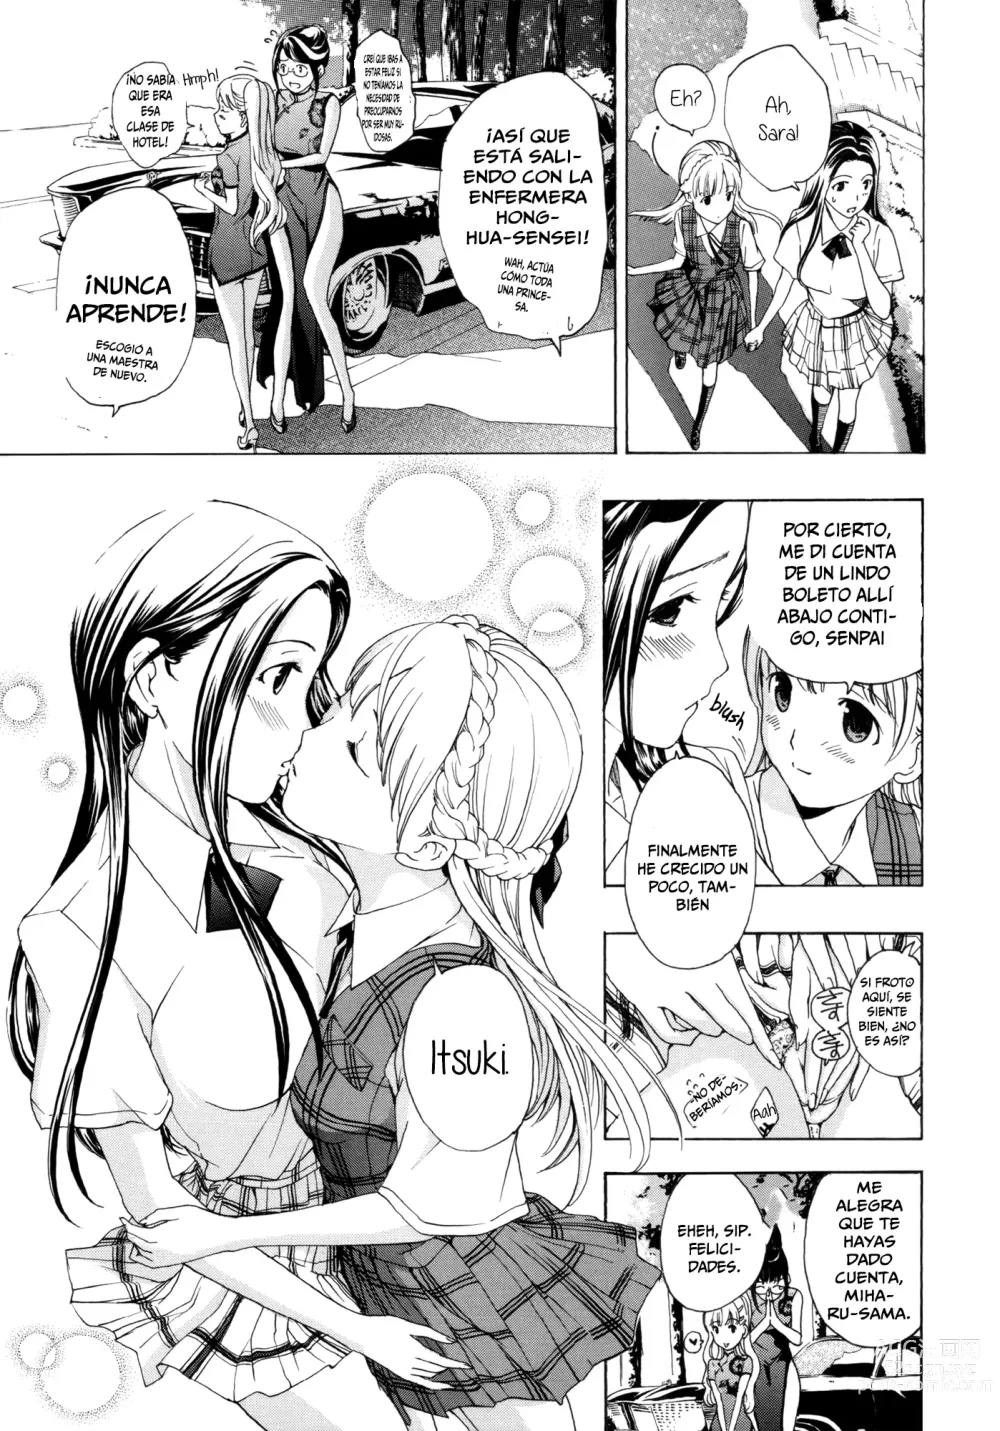 Page 203 of manga Otome Saku. - Maidens bloom in the garden in the sky